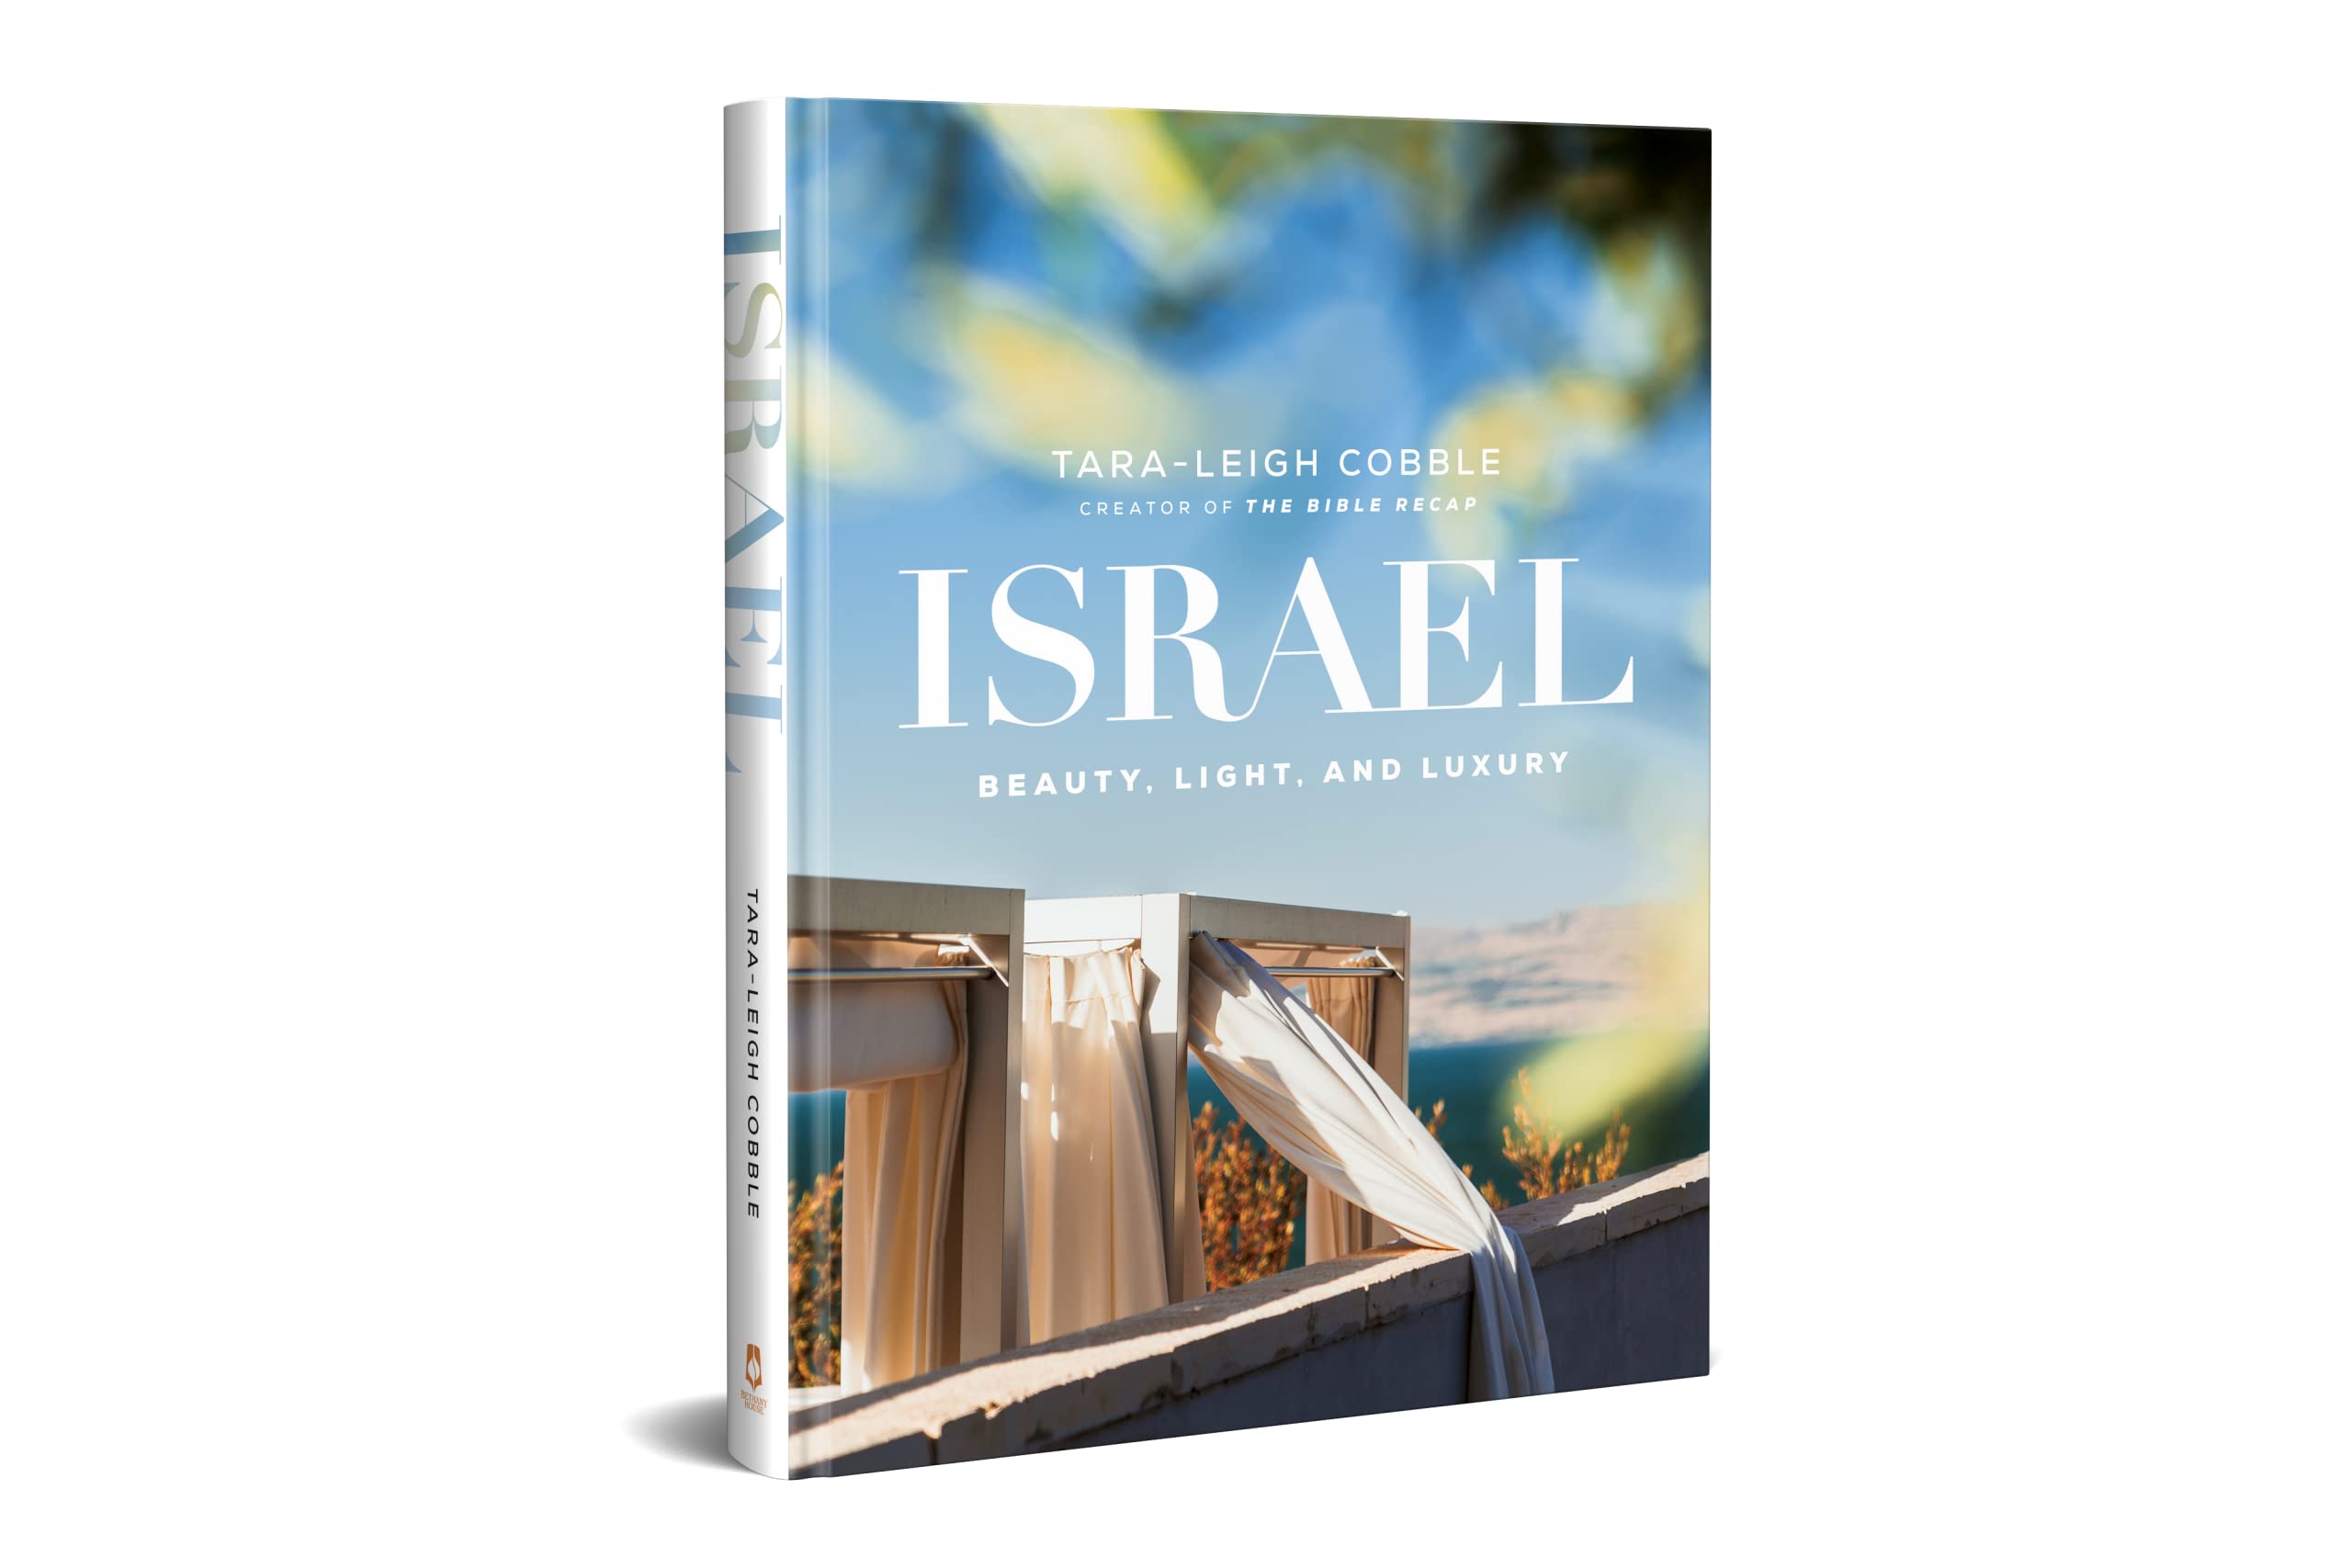 Israel: Beauty, Light, and Luxury (A Vibrant, Full-Color Coffee Table Book with 350 Photos of the Holy Land's Features, Flora, & People. Also Includes 31 Bible Devotionals)